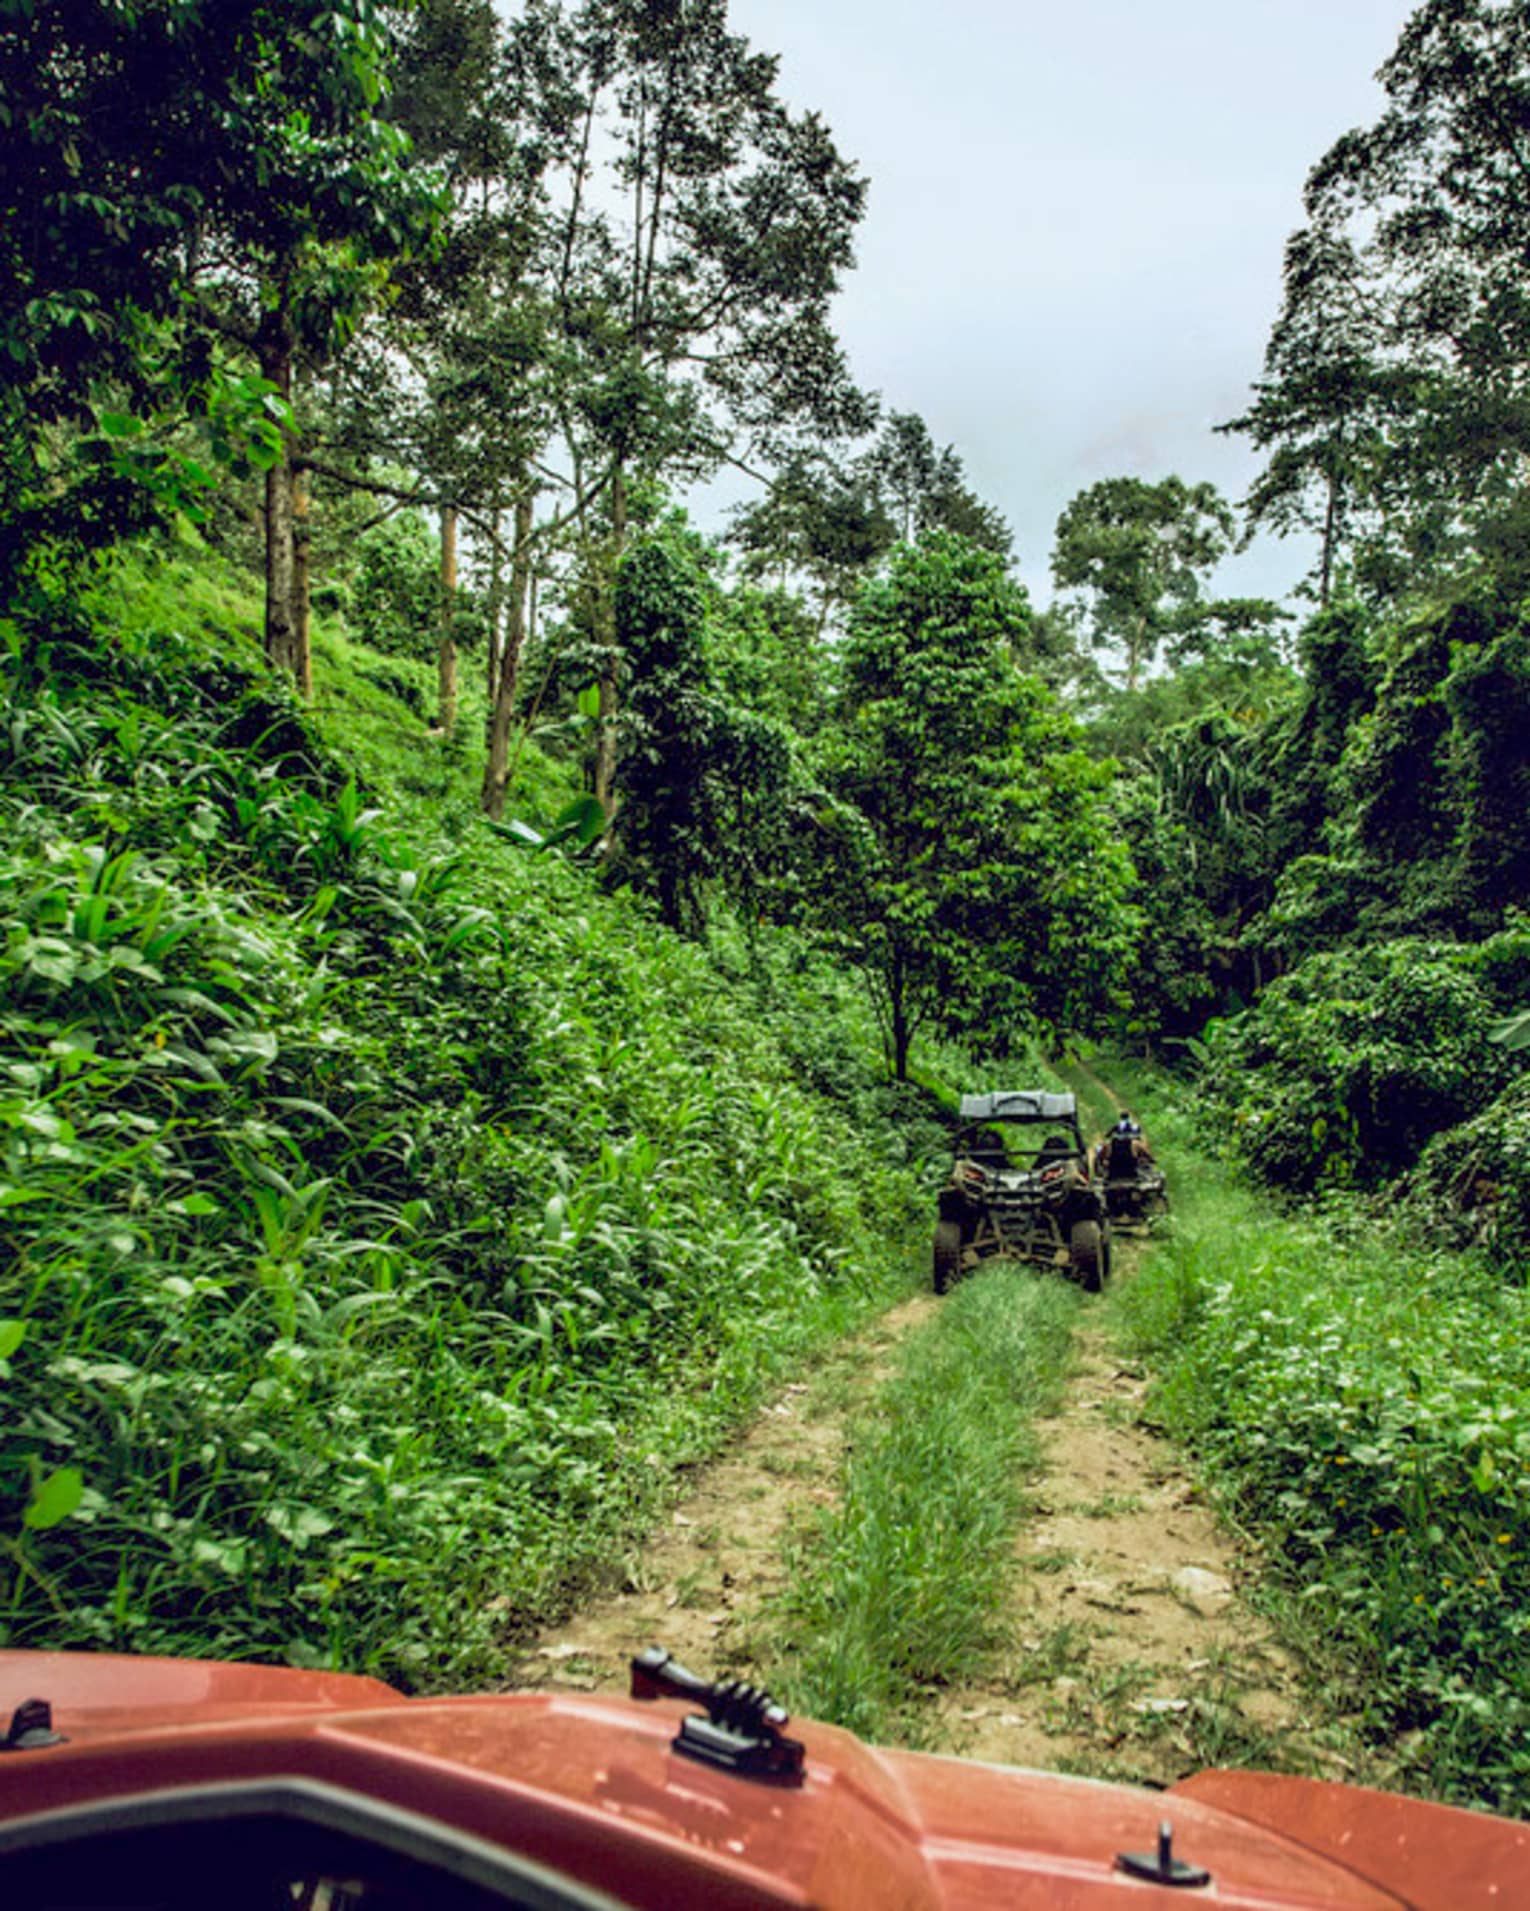 ATVs riding down dirt path in tropical forest